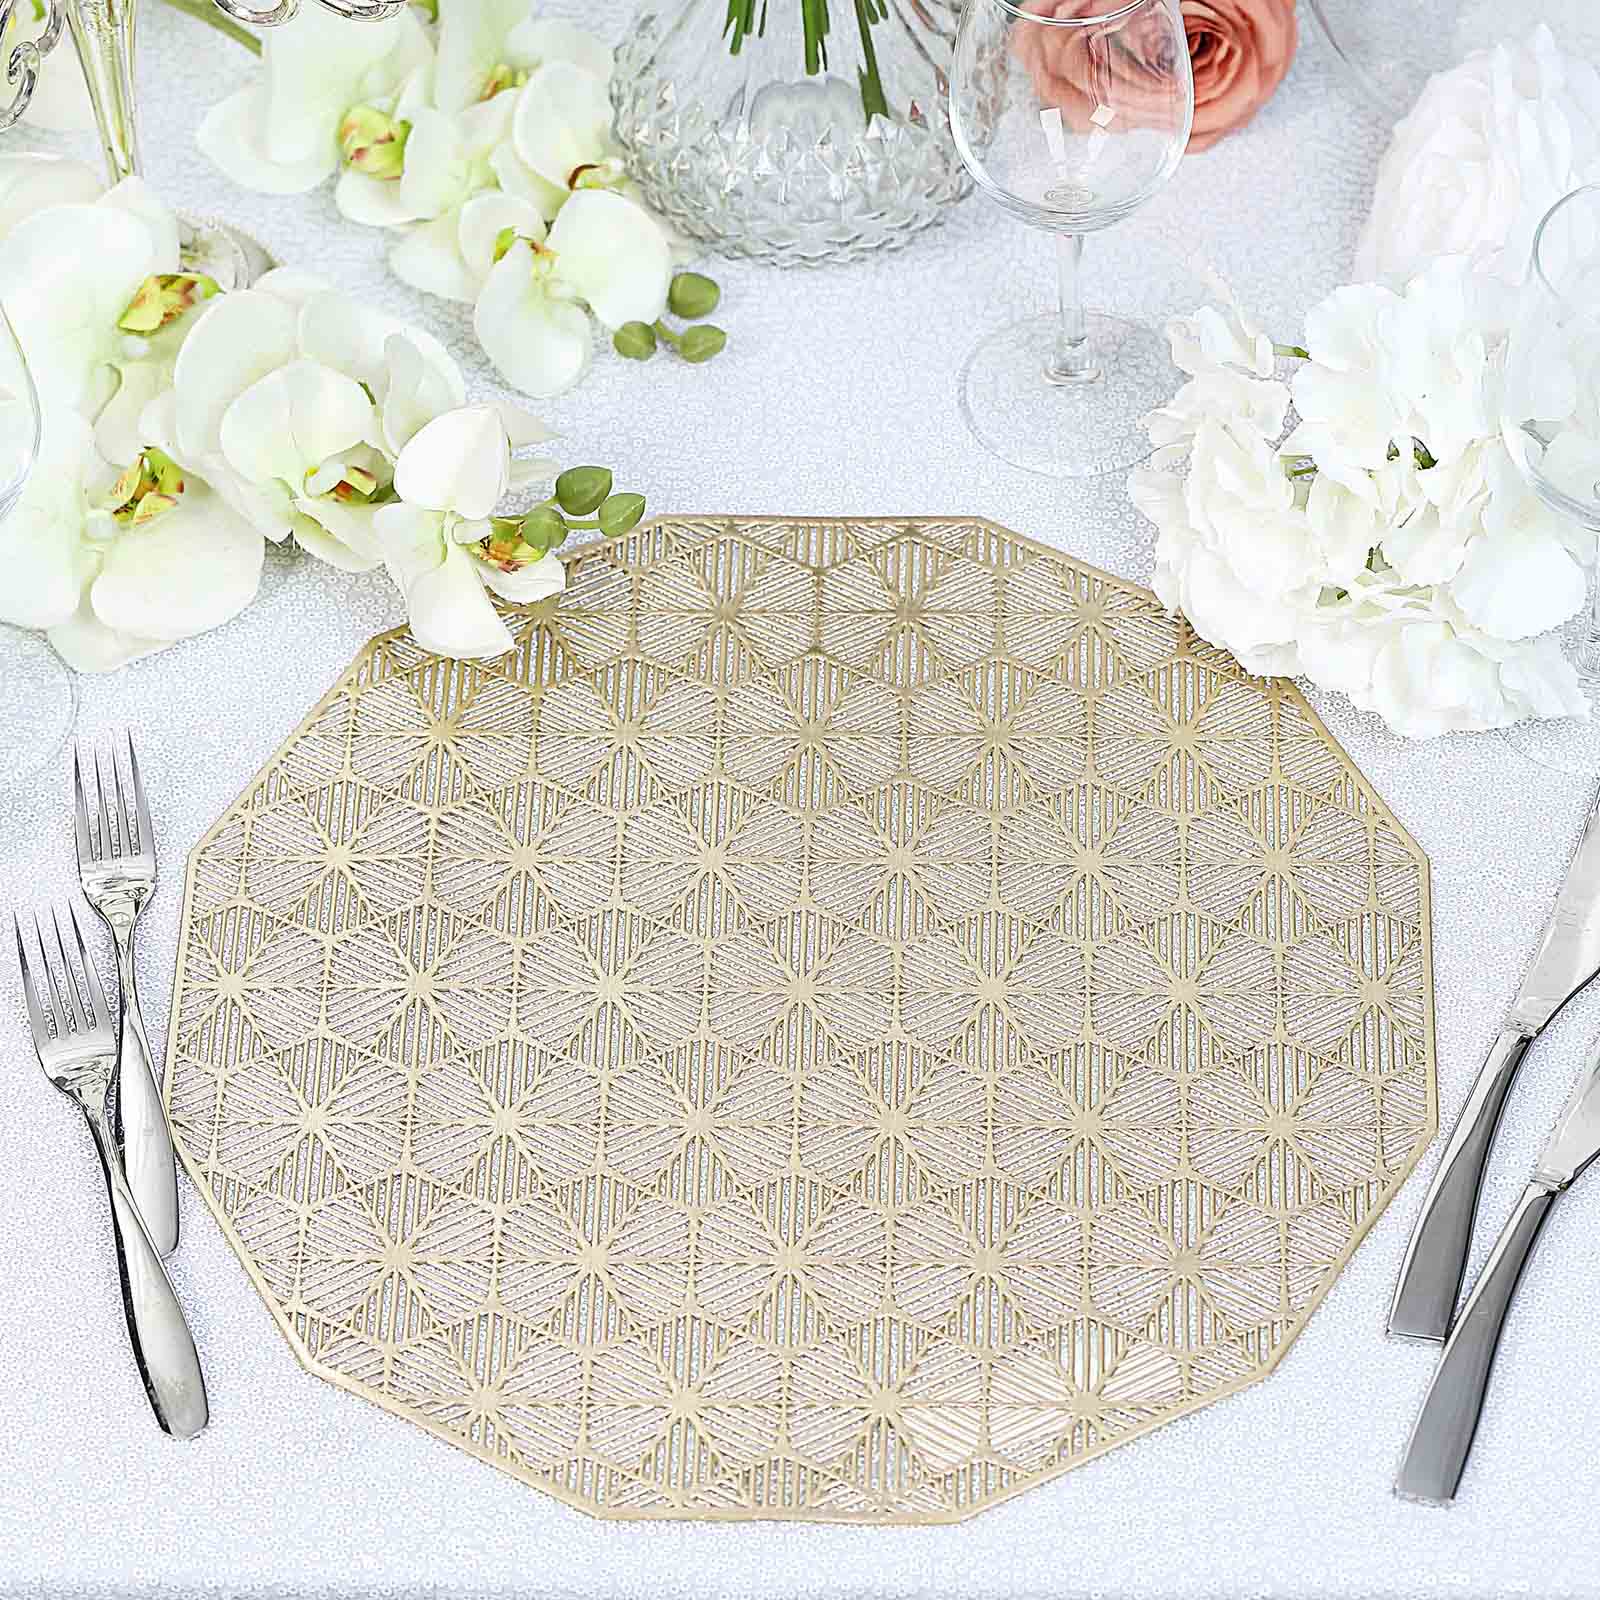 6 Pack 15 Rose Gold Metallic Non-Slip Placemats, Spiked Design